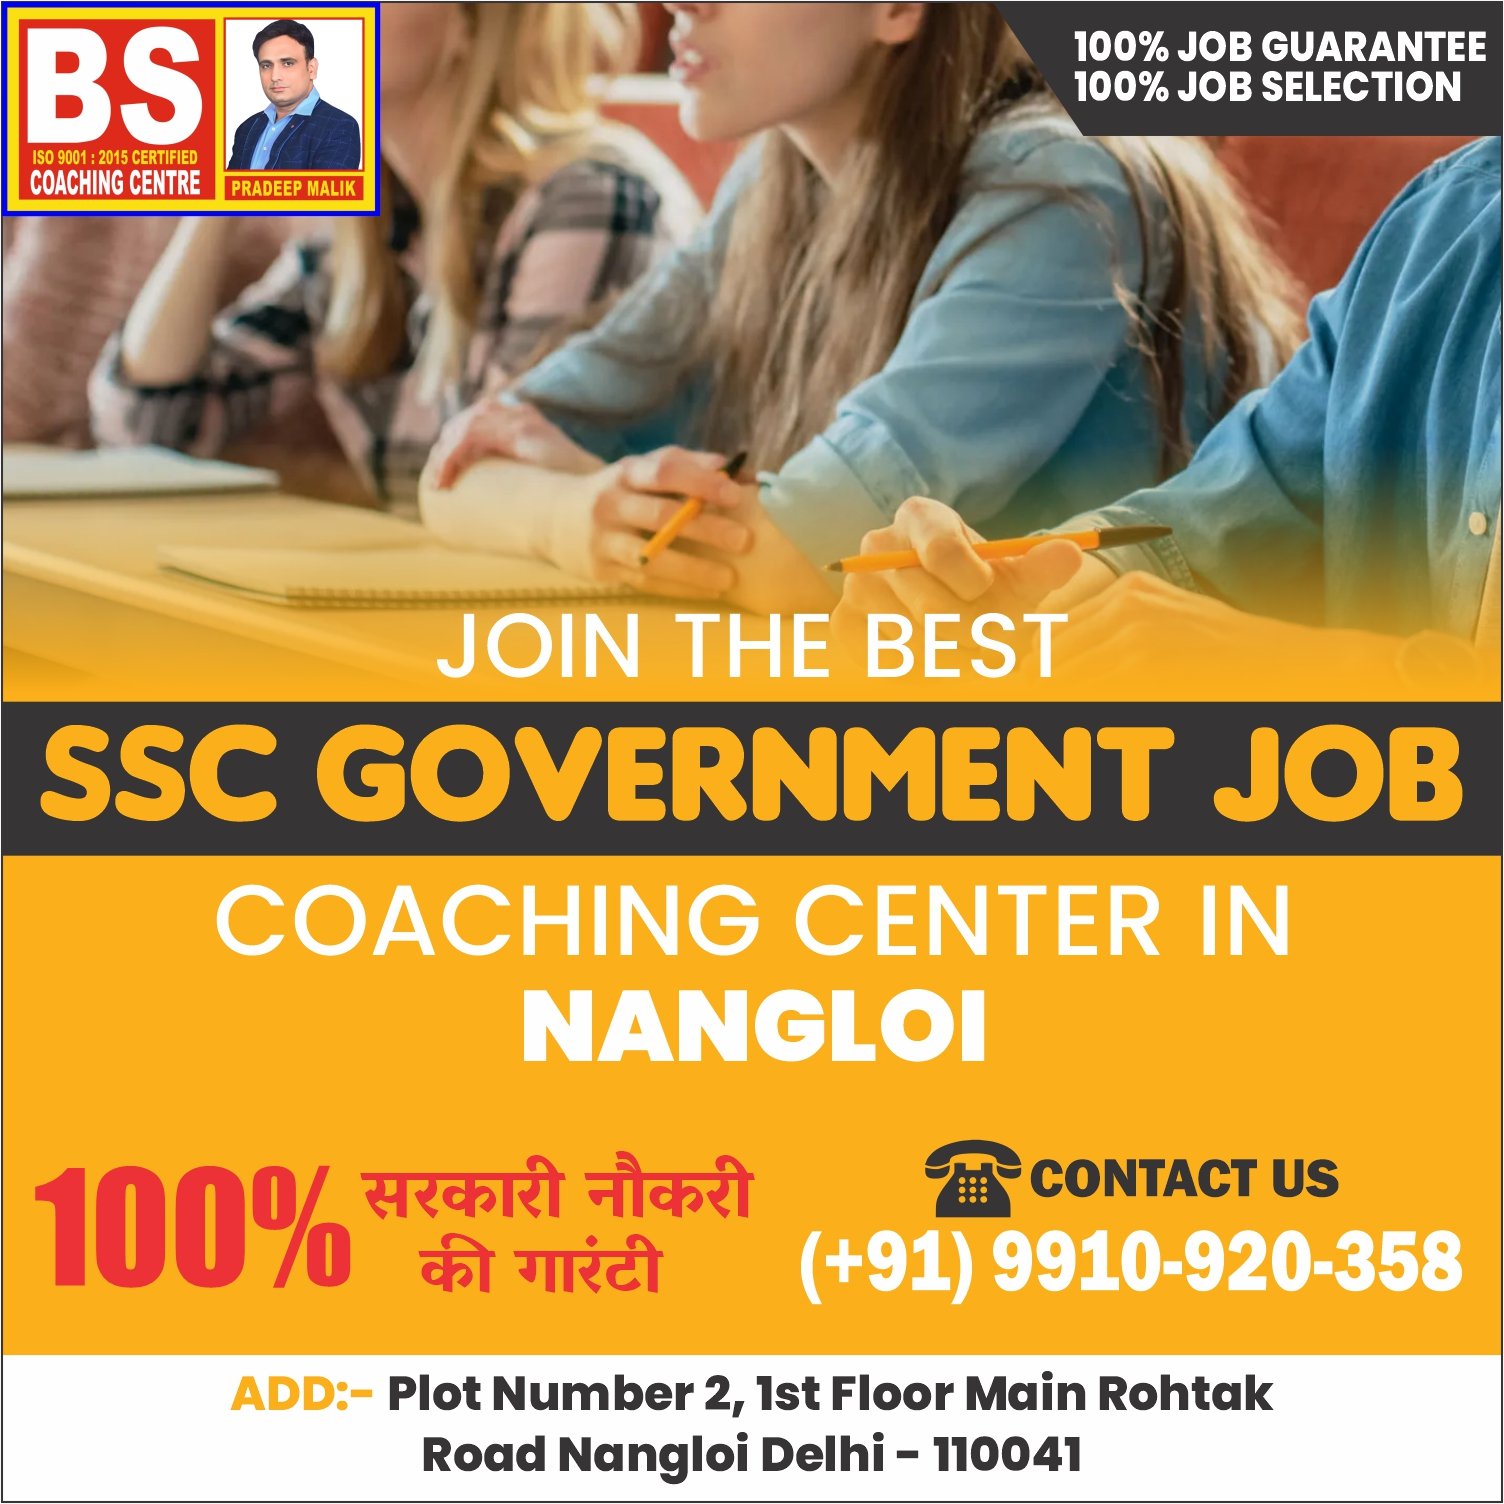 BS Coaching Centre: The Best SSC Coaching Near Me for Top Results